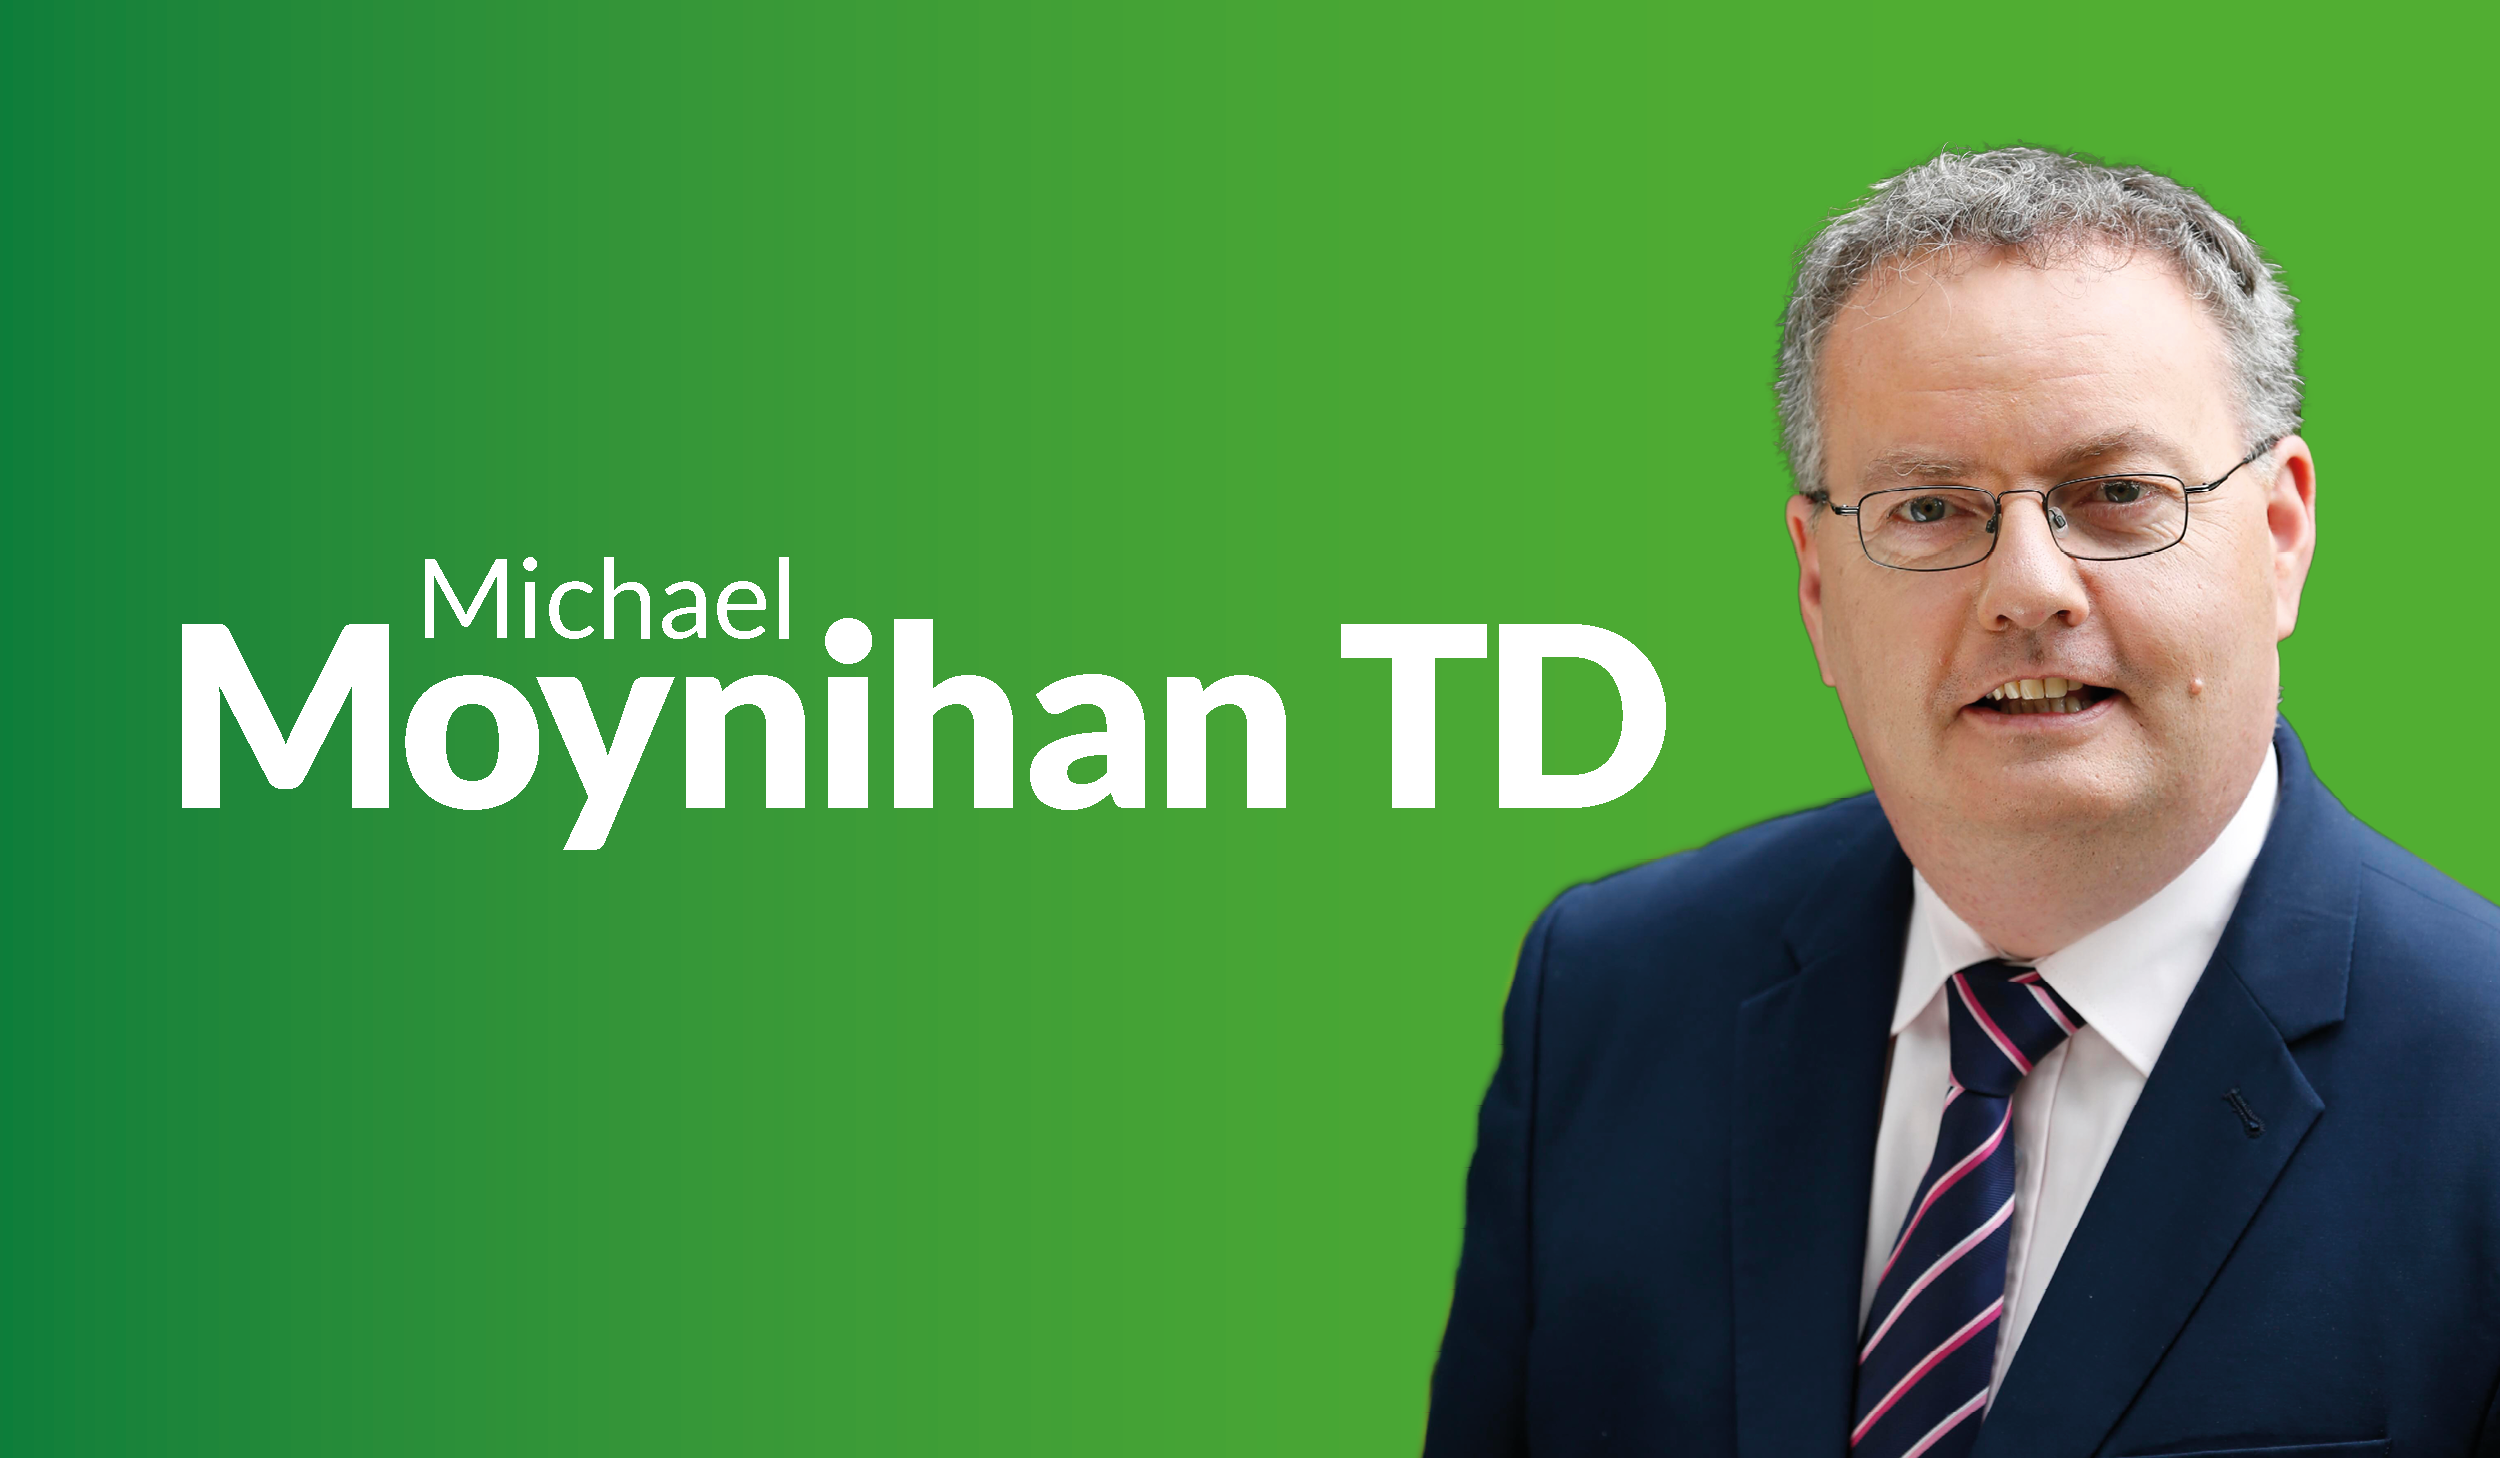 We must examine how best to support the participation of persons with disabilities in the electoral process - Moynihan